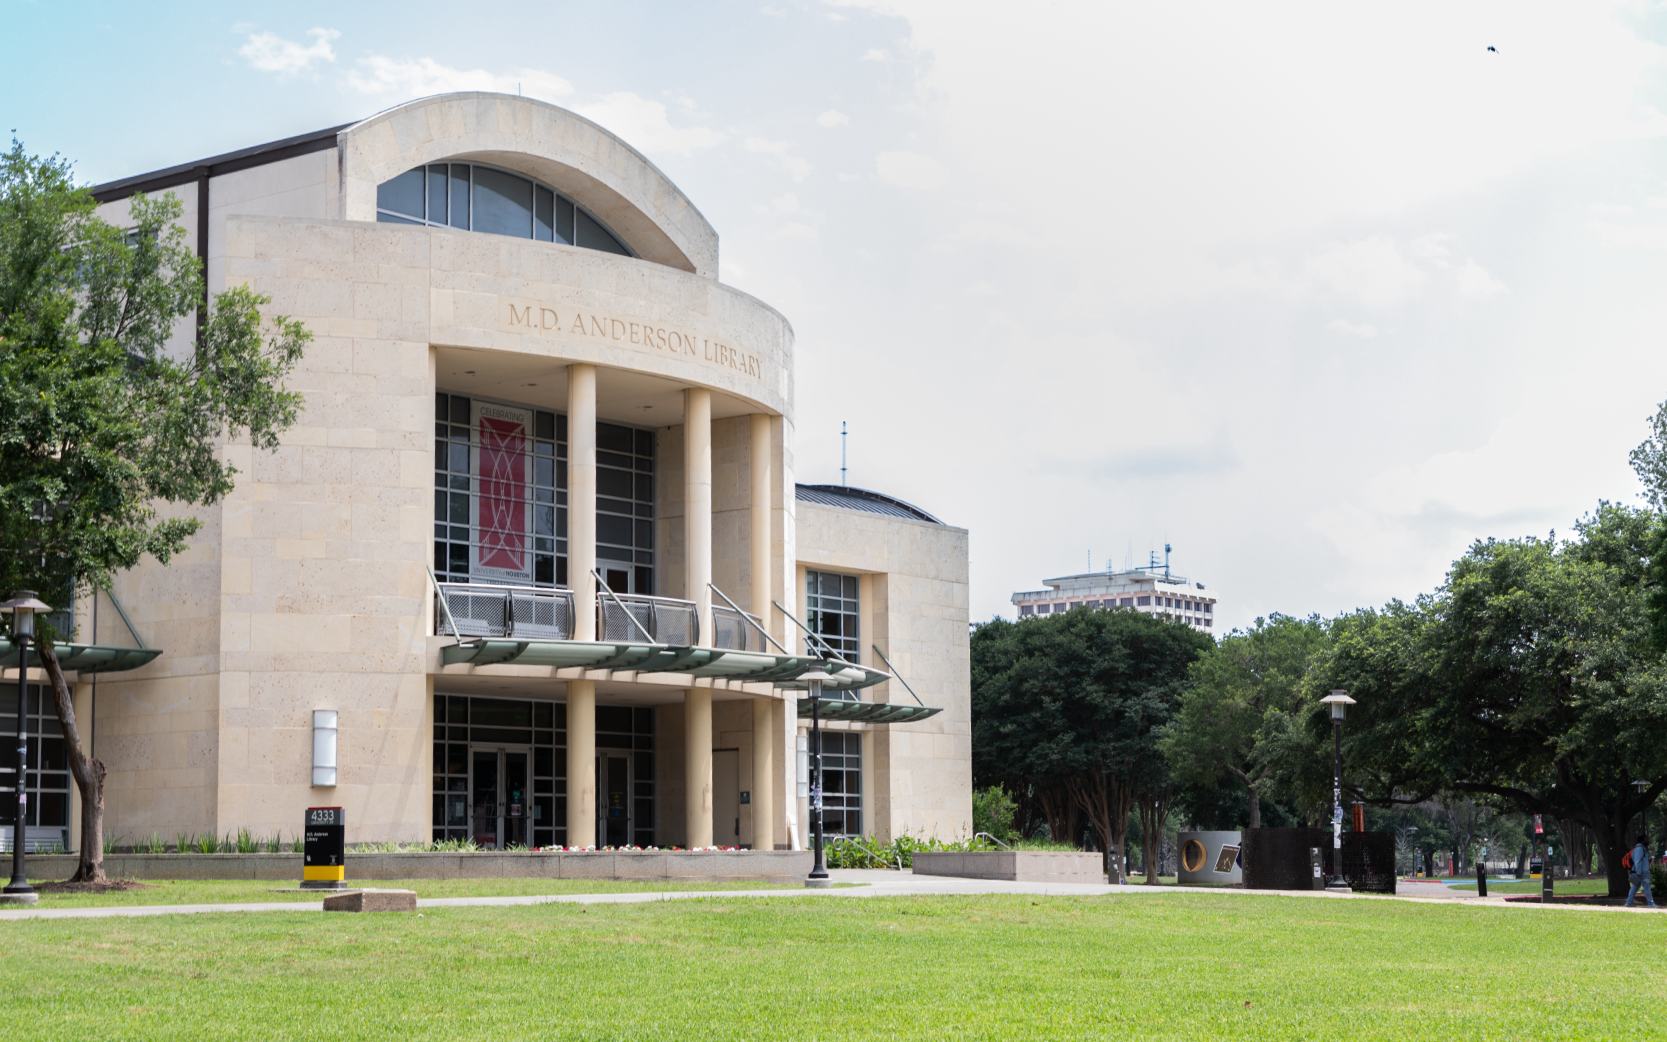 Scholarships, Awards Transporting Coogs to New Academic Environments